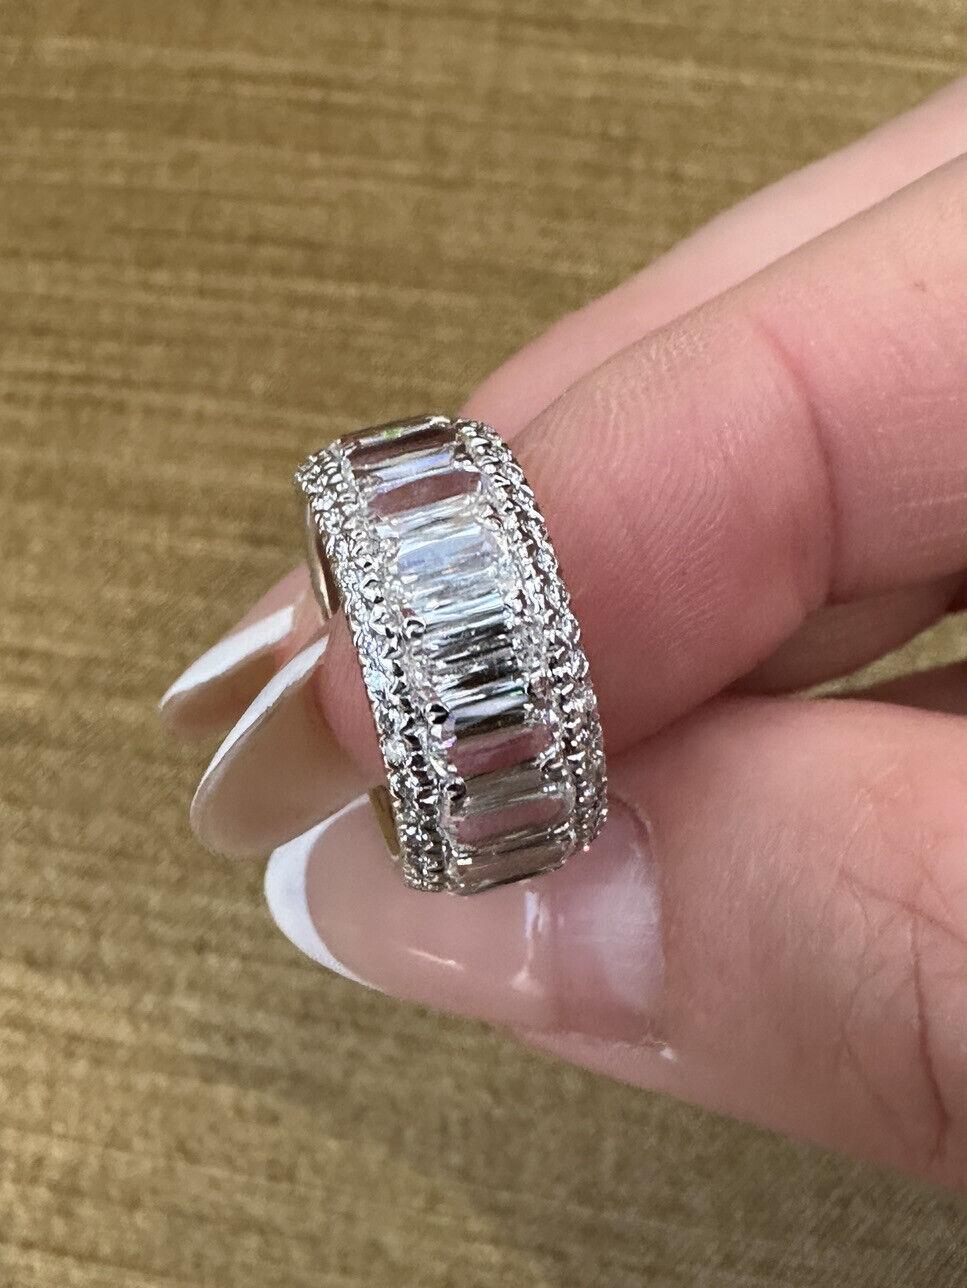 Christopher Designs Crisscut L'Amour Diamond Wide Eternity Band in 18k White Gold

Wide Crisscut L'Amour Diamond Eternity Band features three rows of Diamonds going all the way around with 19 Crisscut 